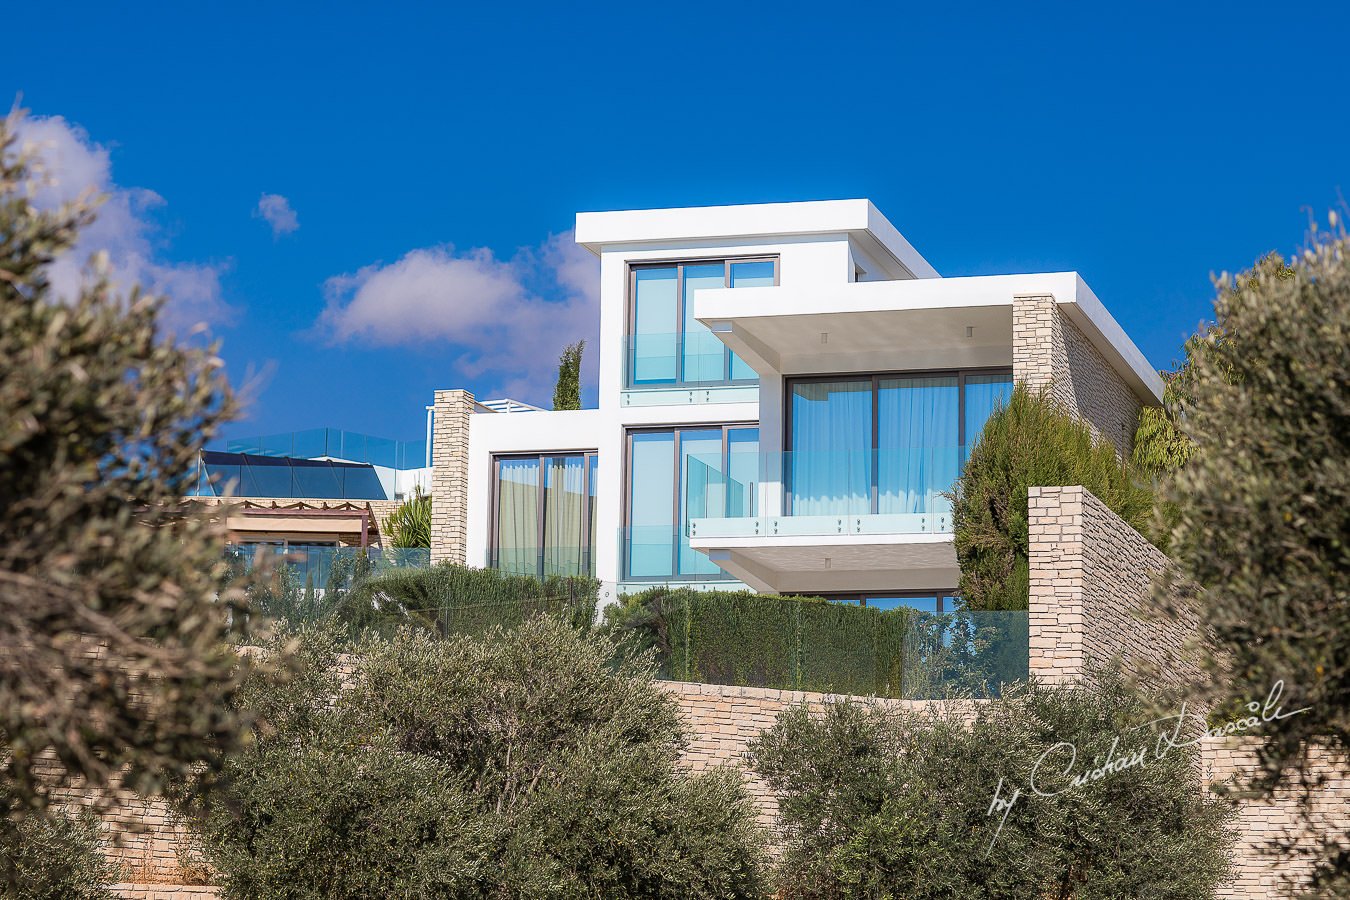 Beautiful Villa at Cap St. George captured during a beautiful wedding in Paphos by Cyprus Photographer Cristian Dascalu.